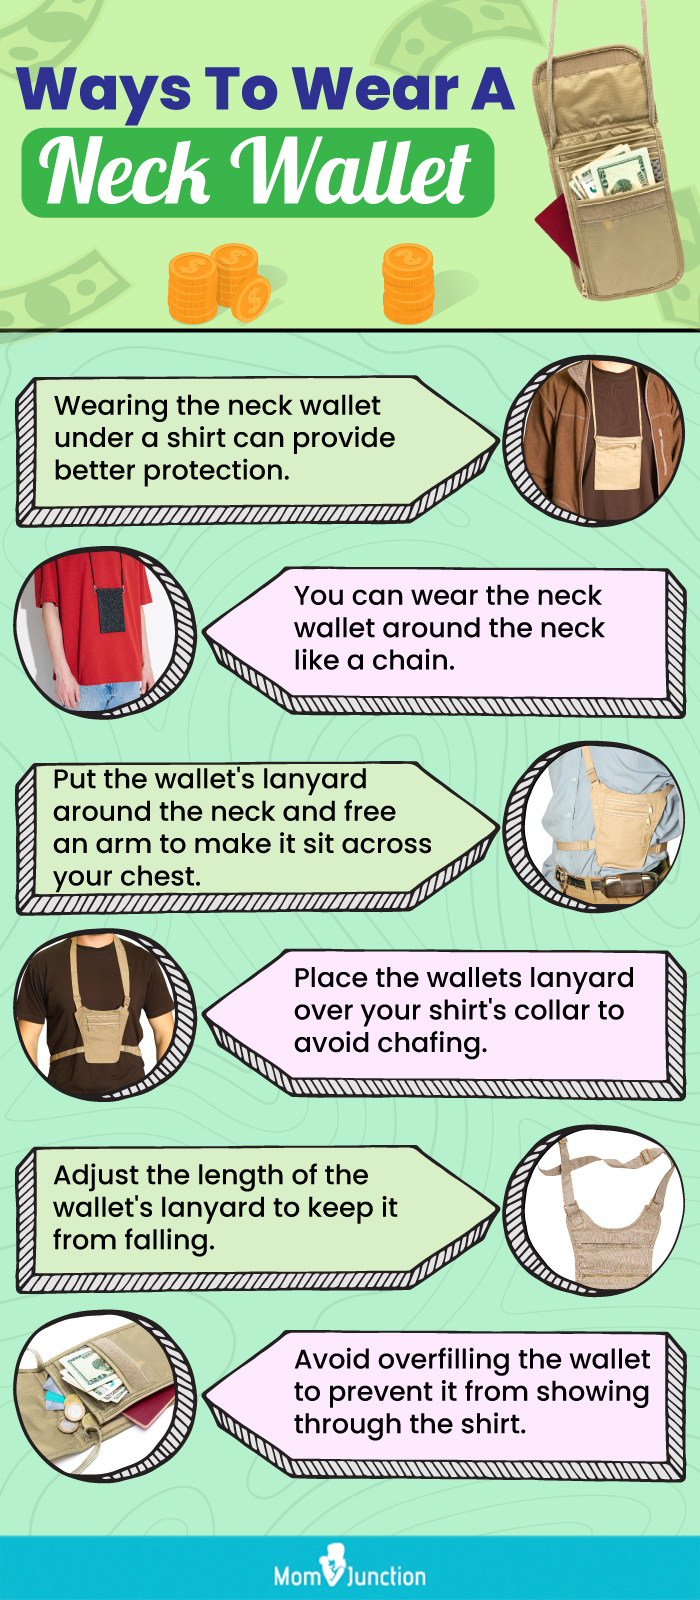 Ways To Wear A Neck Wallet (infographic)